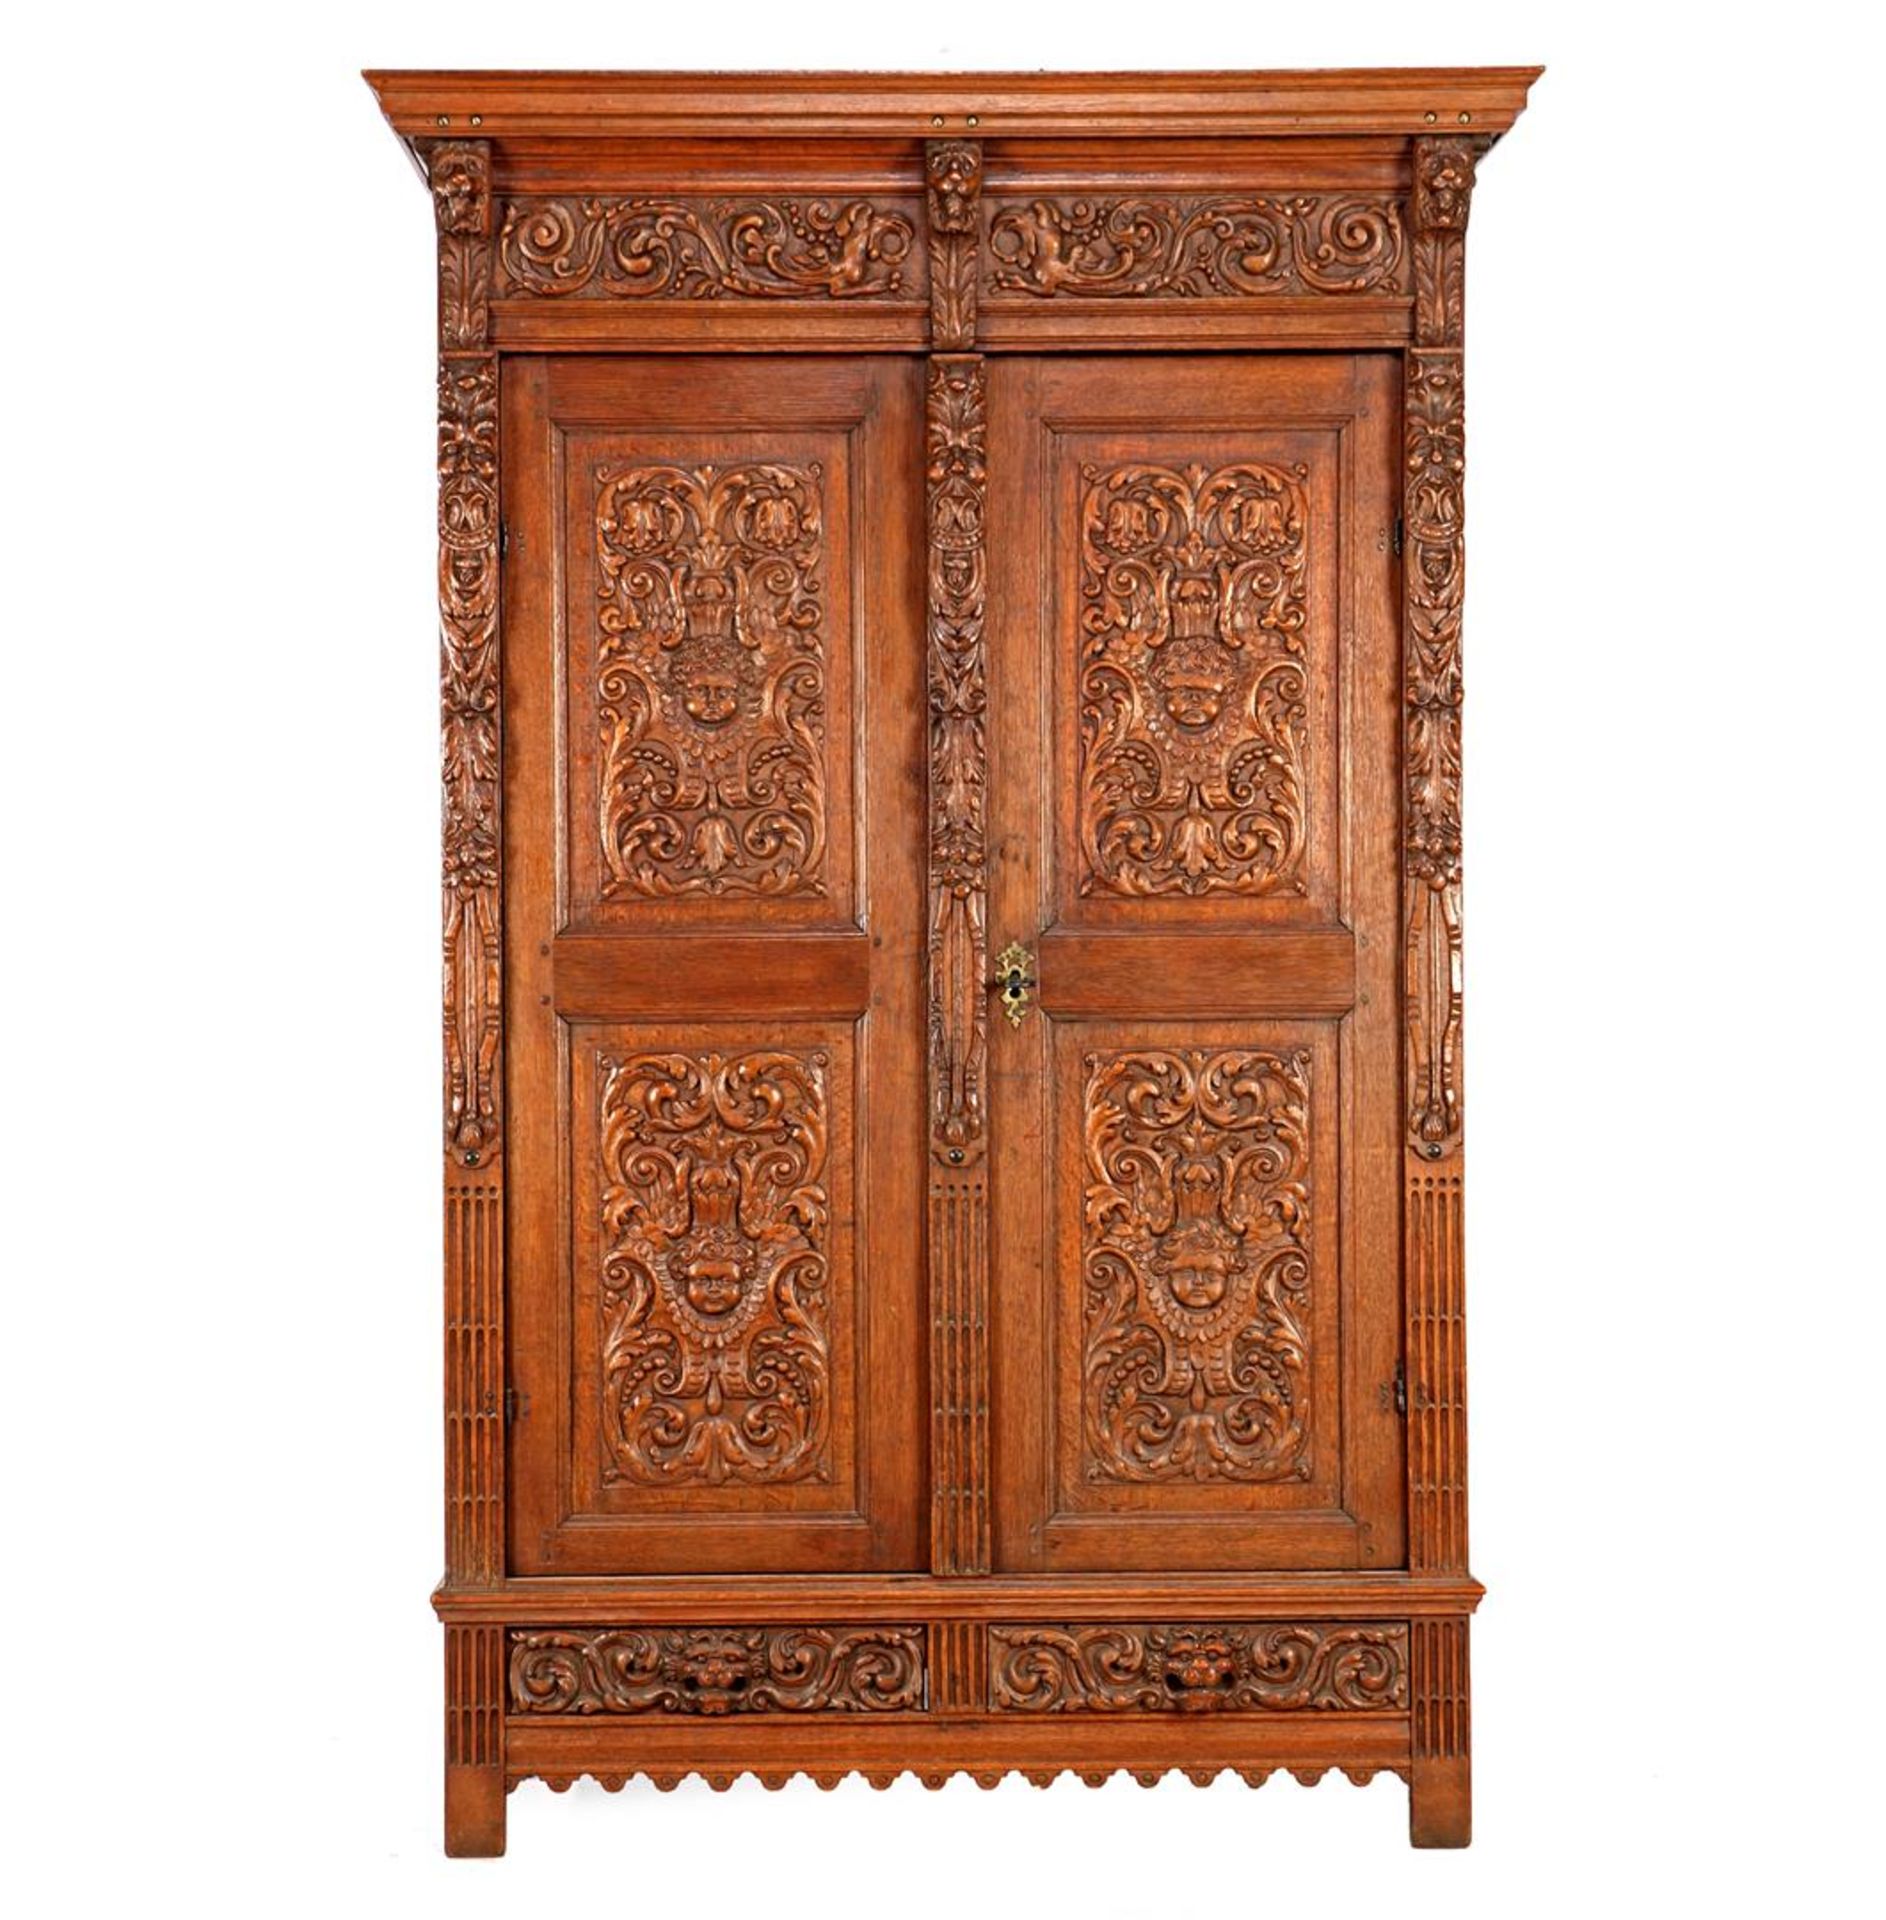 Dutch oak 2-door cupboard with richly carved décor